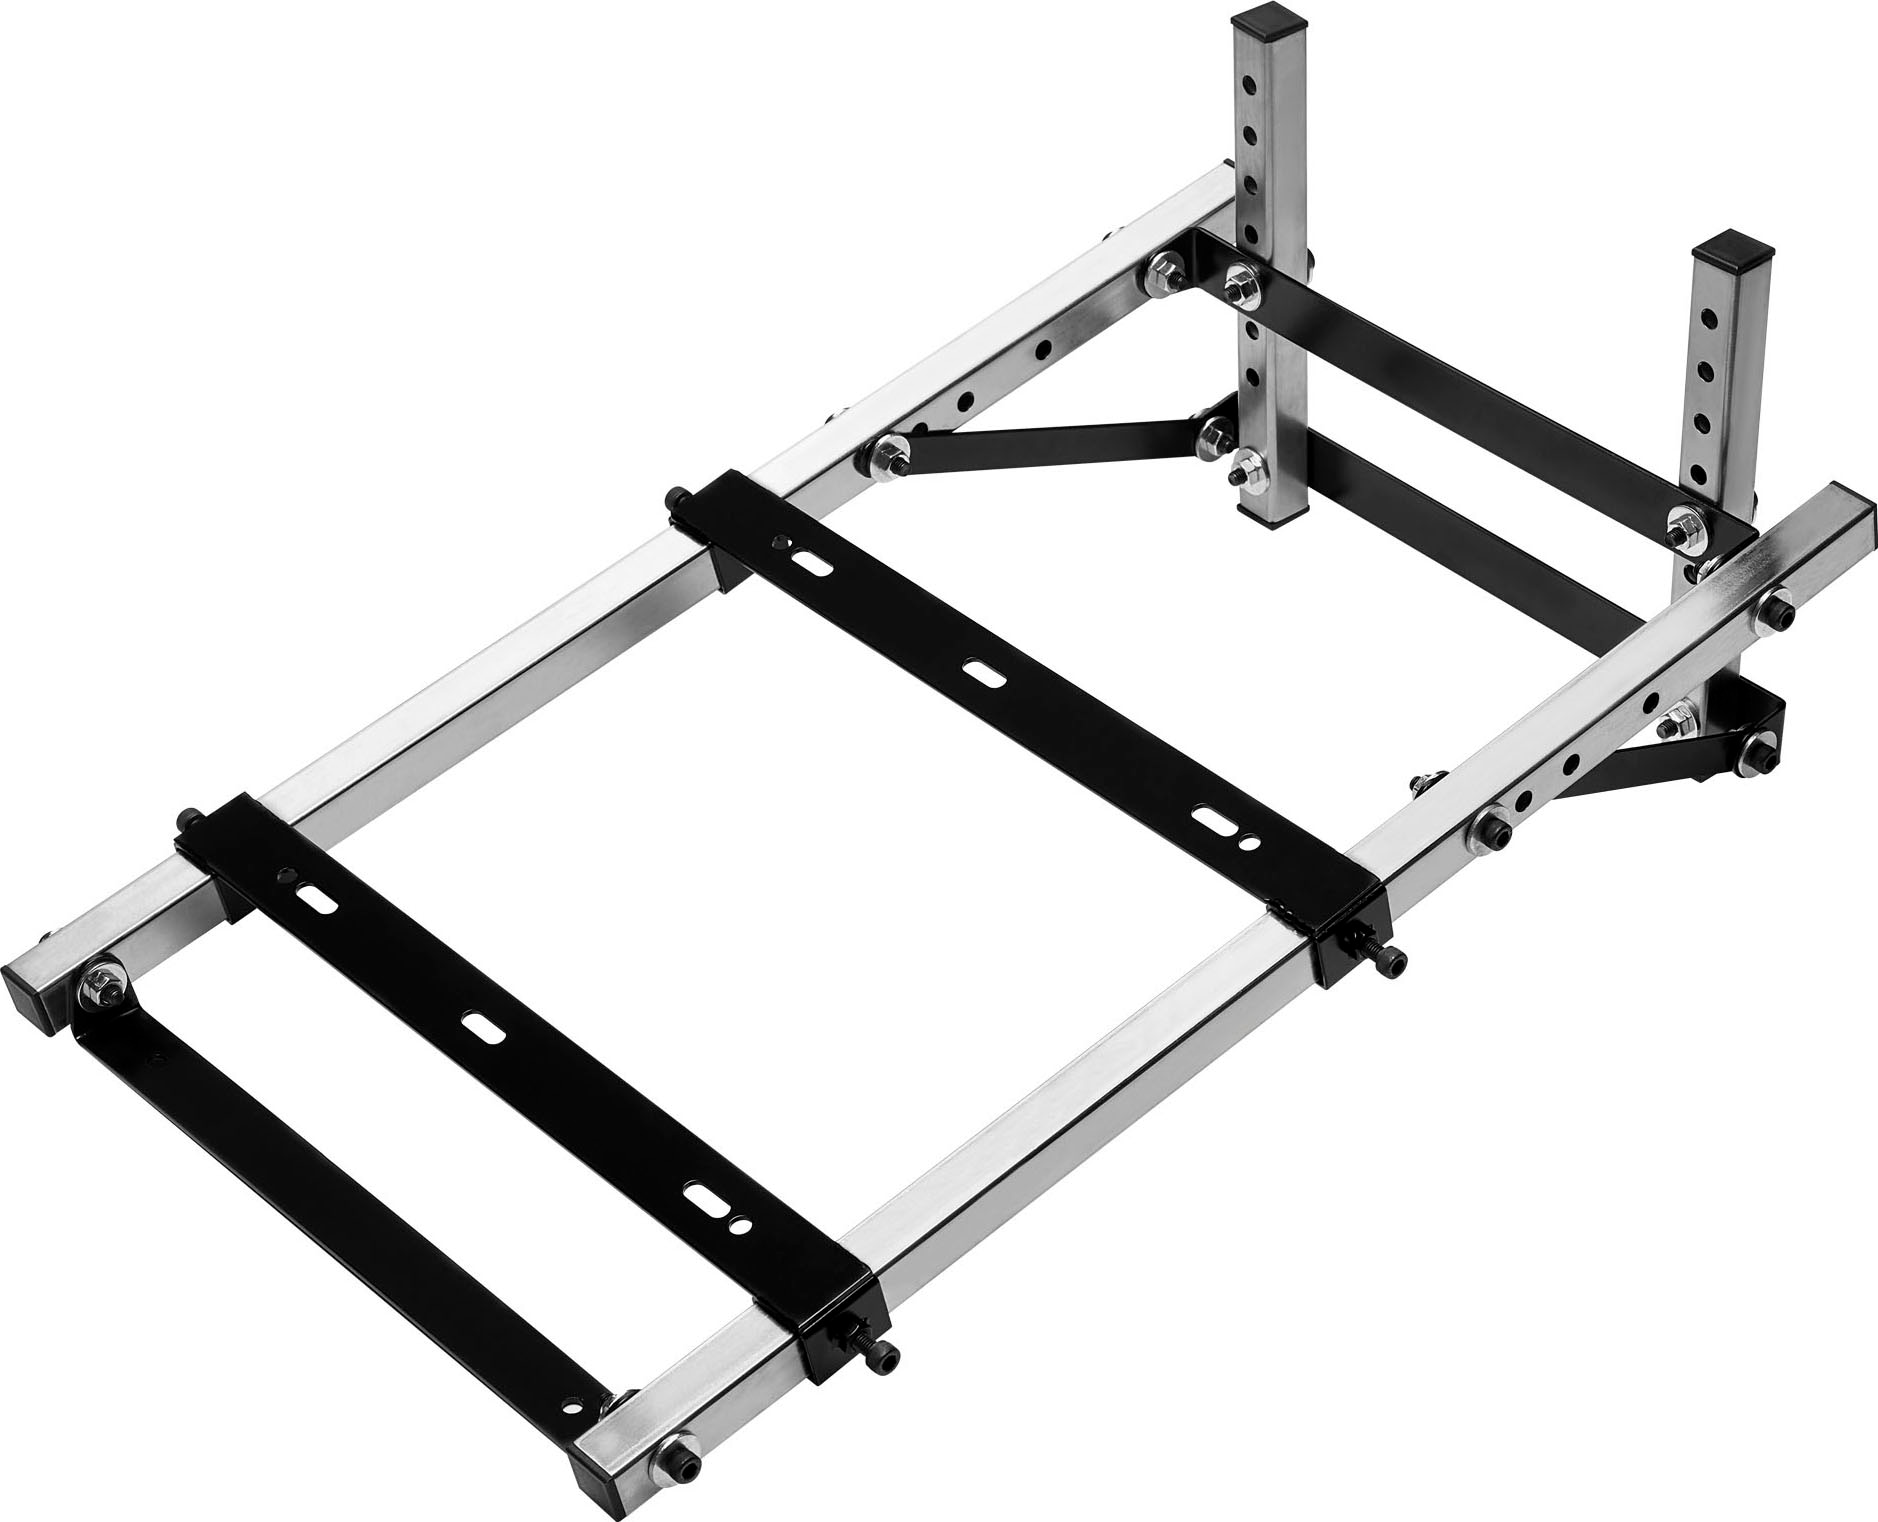 Controller »T-Pedals Stand«